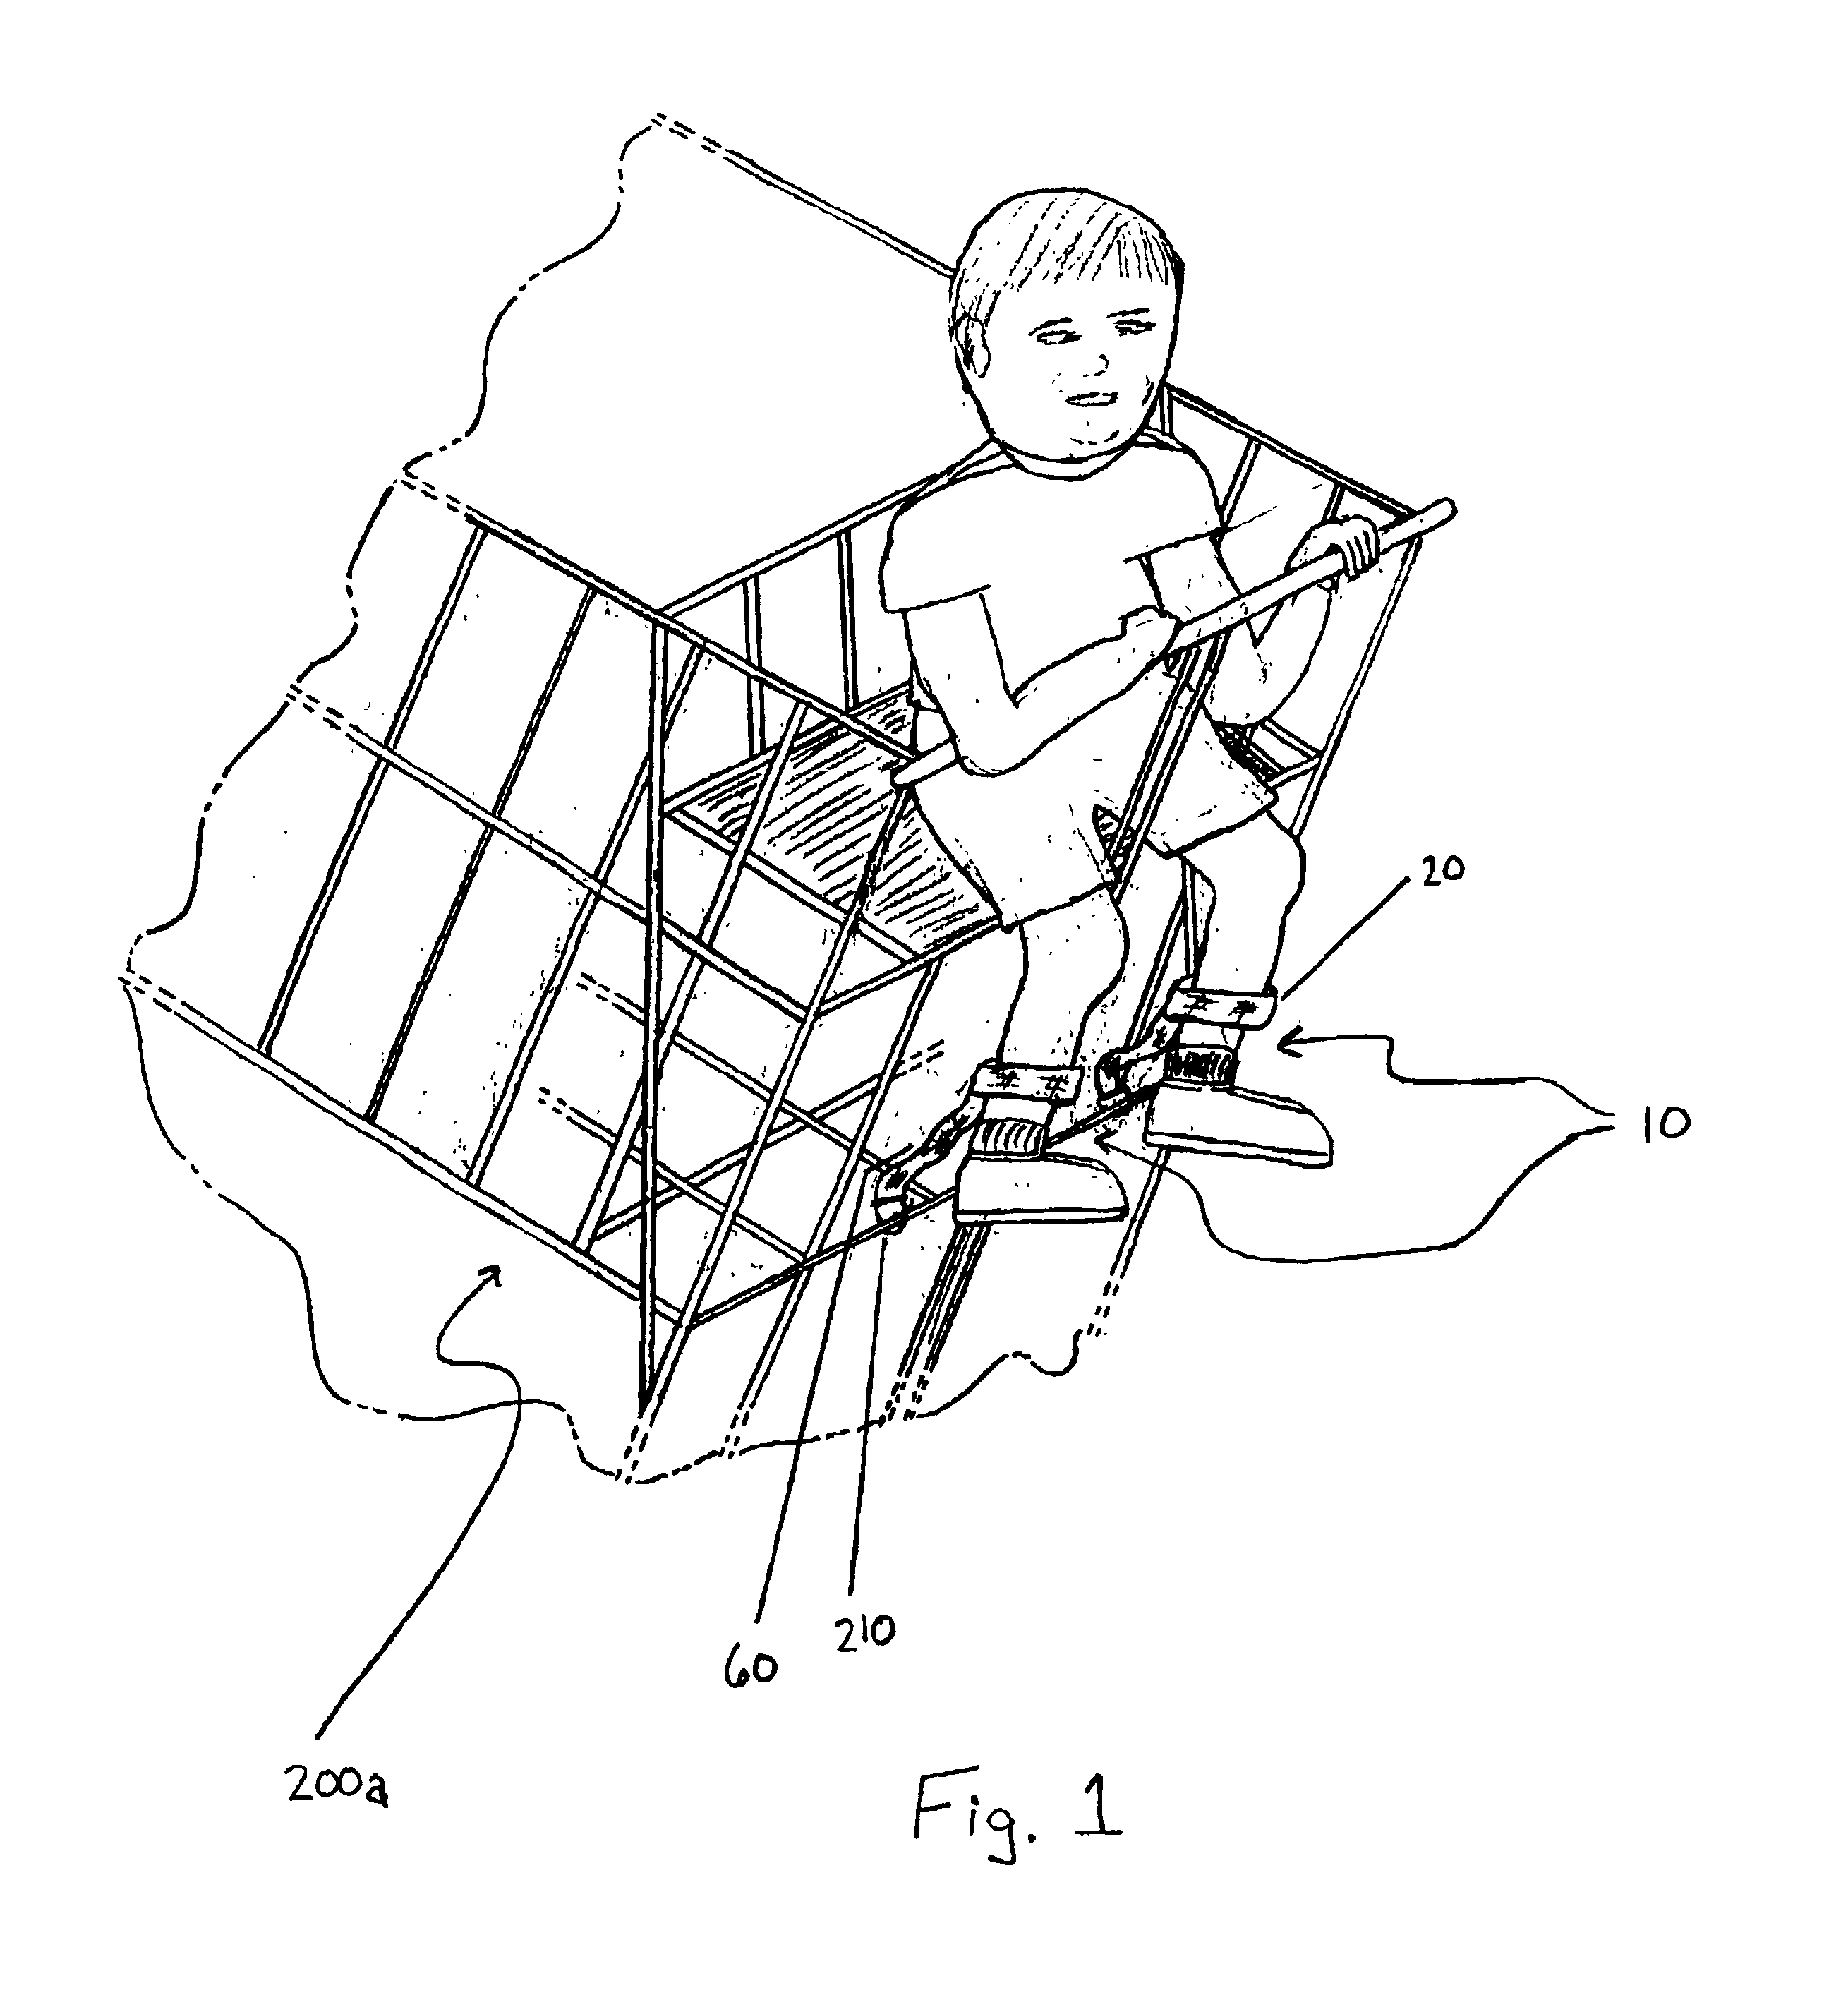 Child safety restraining device for use where a child is seated